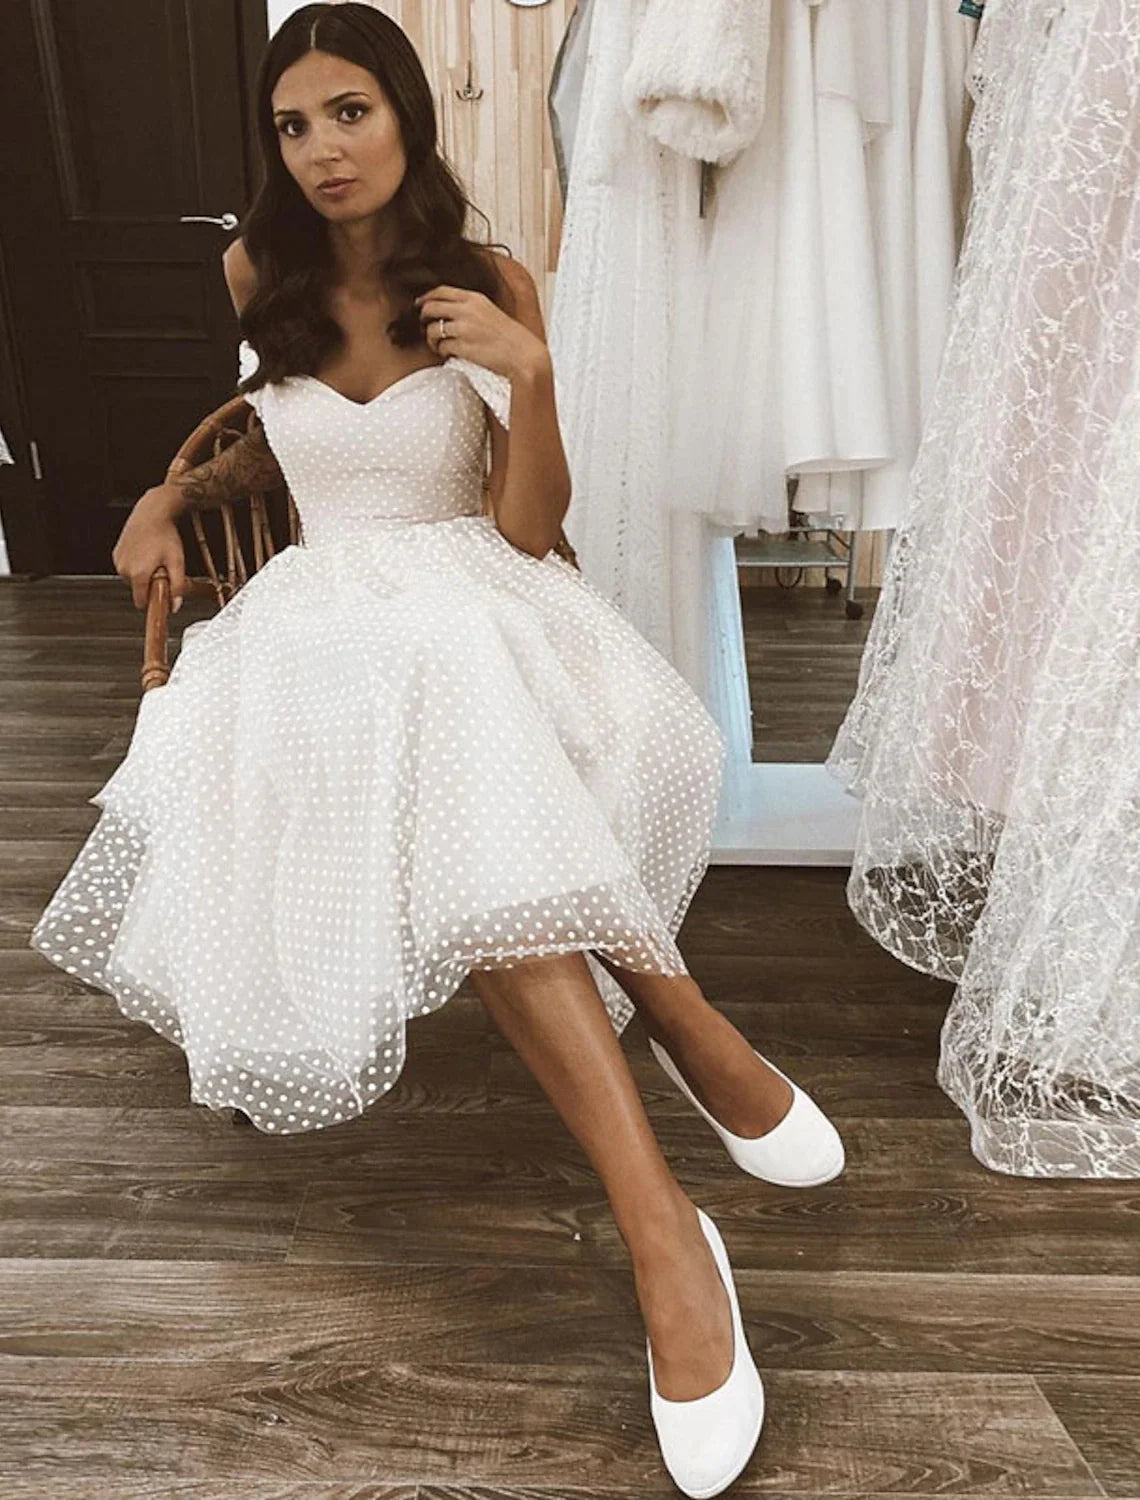 Reception Little White Dresses Wedding Dresses A-Line Off Shoulder Cap Sleeve Knee Length Tulle Bridal Gowns With